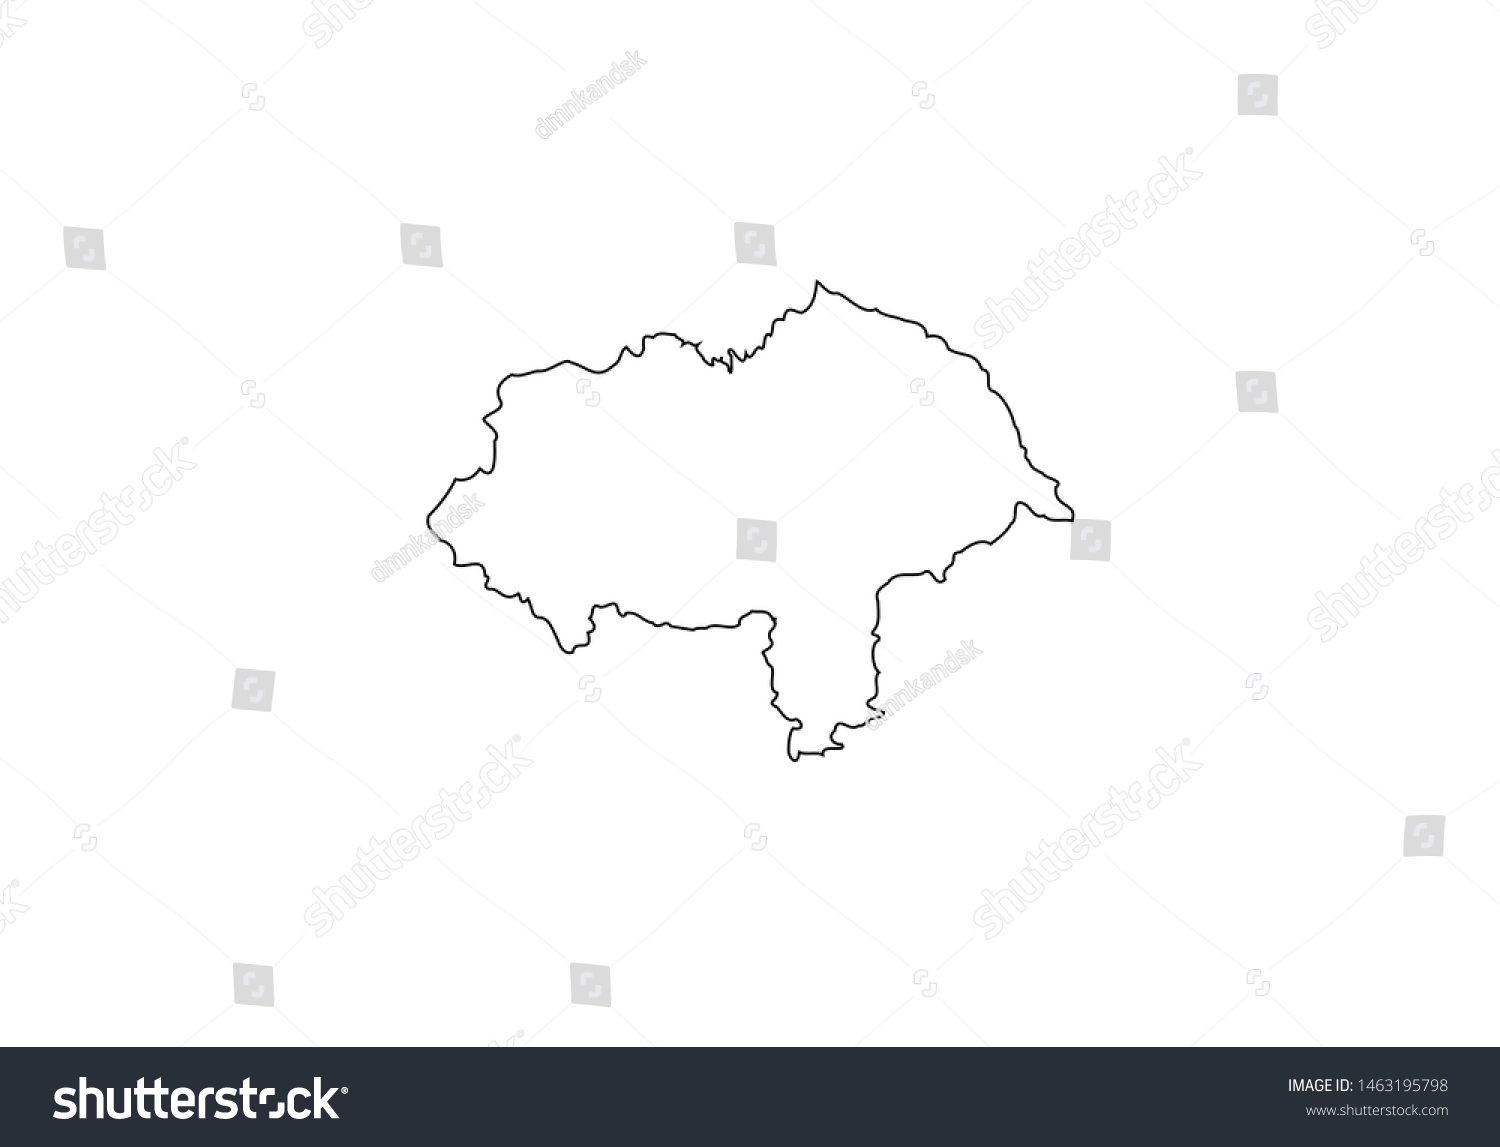 SVG of North Yorkshire County outline map England region United Kingdom state country svg